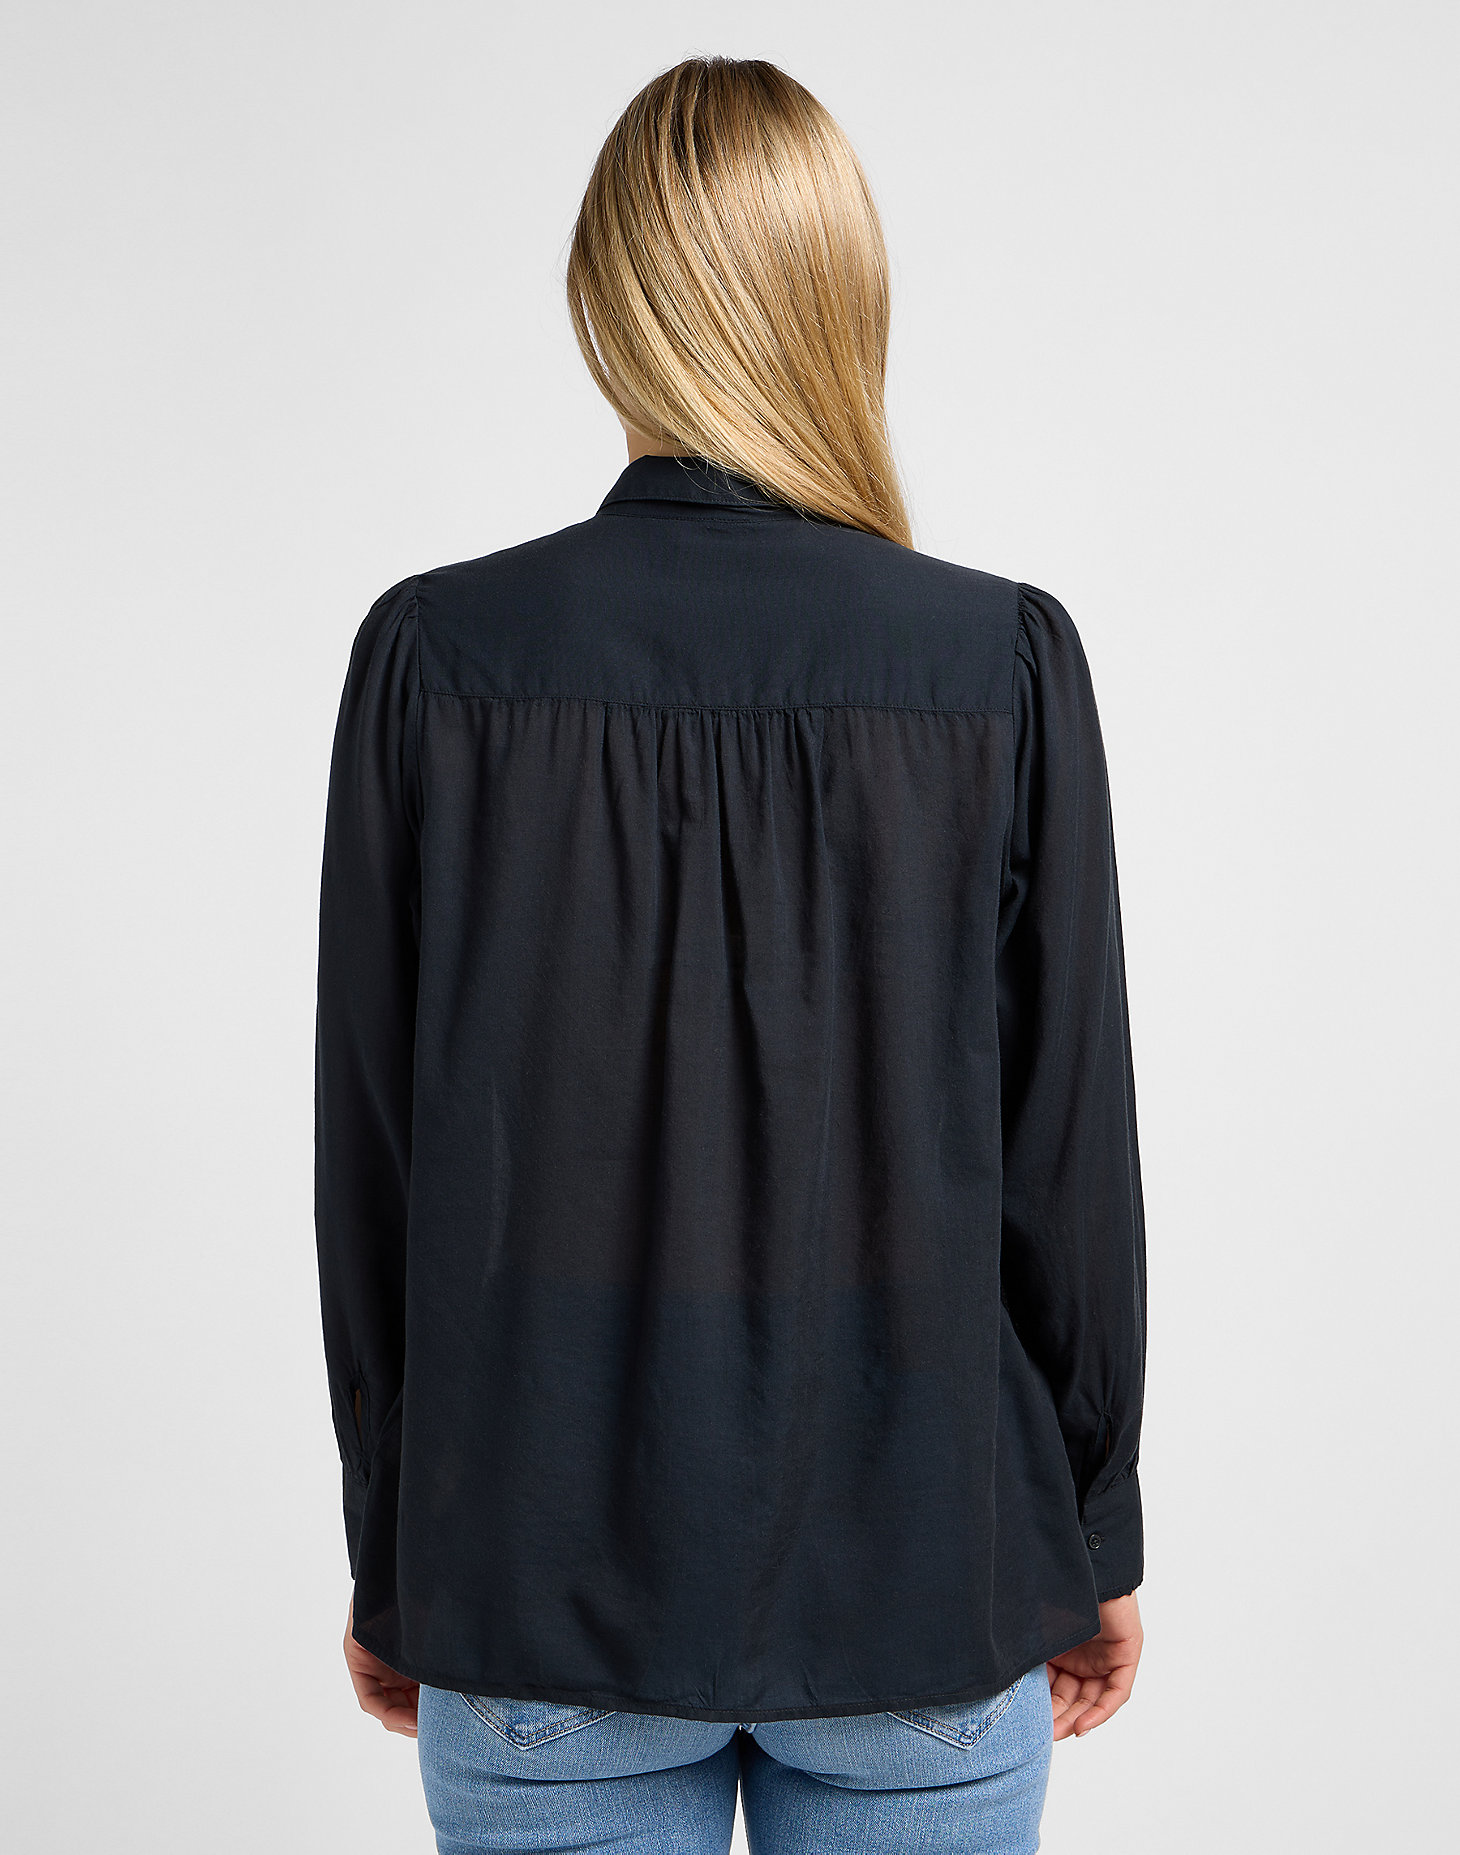 Shirred Blouse in Unionall Blk alternative view 1